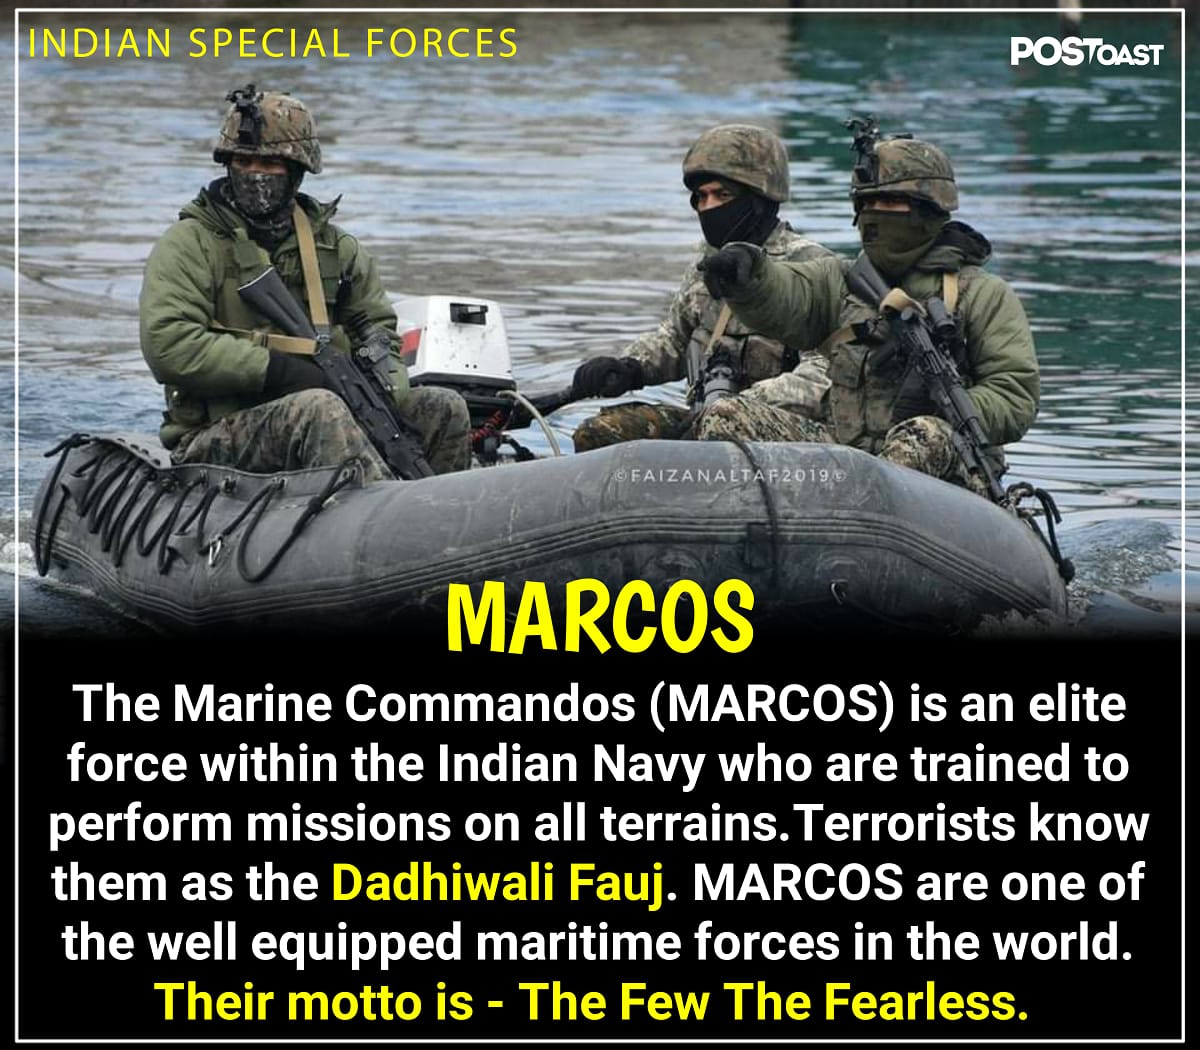 MARCOS (Marine Commandos)- Indian Special Forces